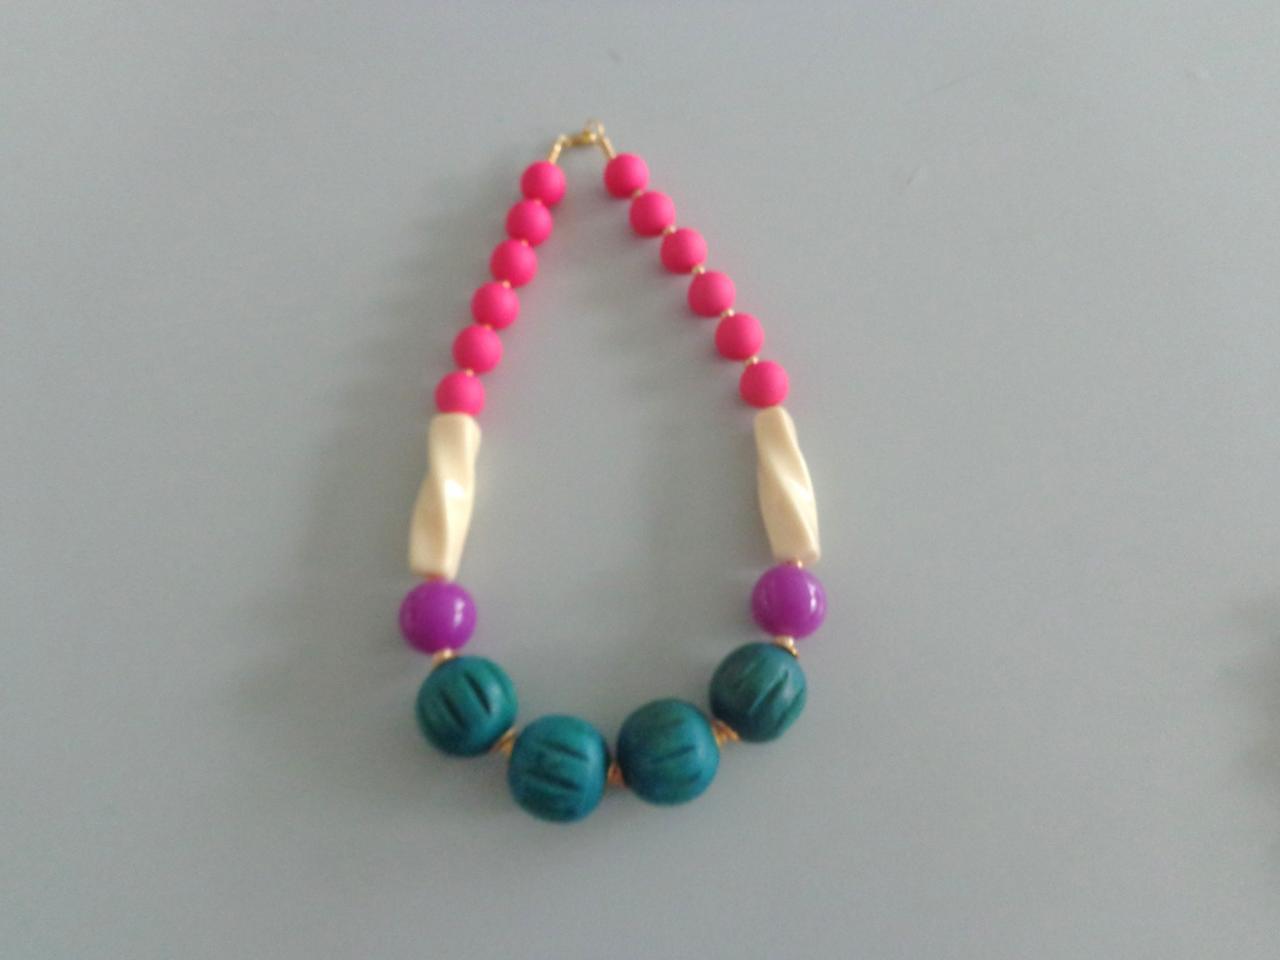 Candy Chunky Necklace. Colorful Necklace, Pink Teal Ivory Necklace